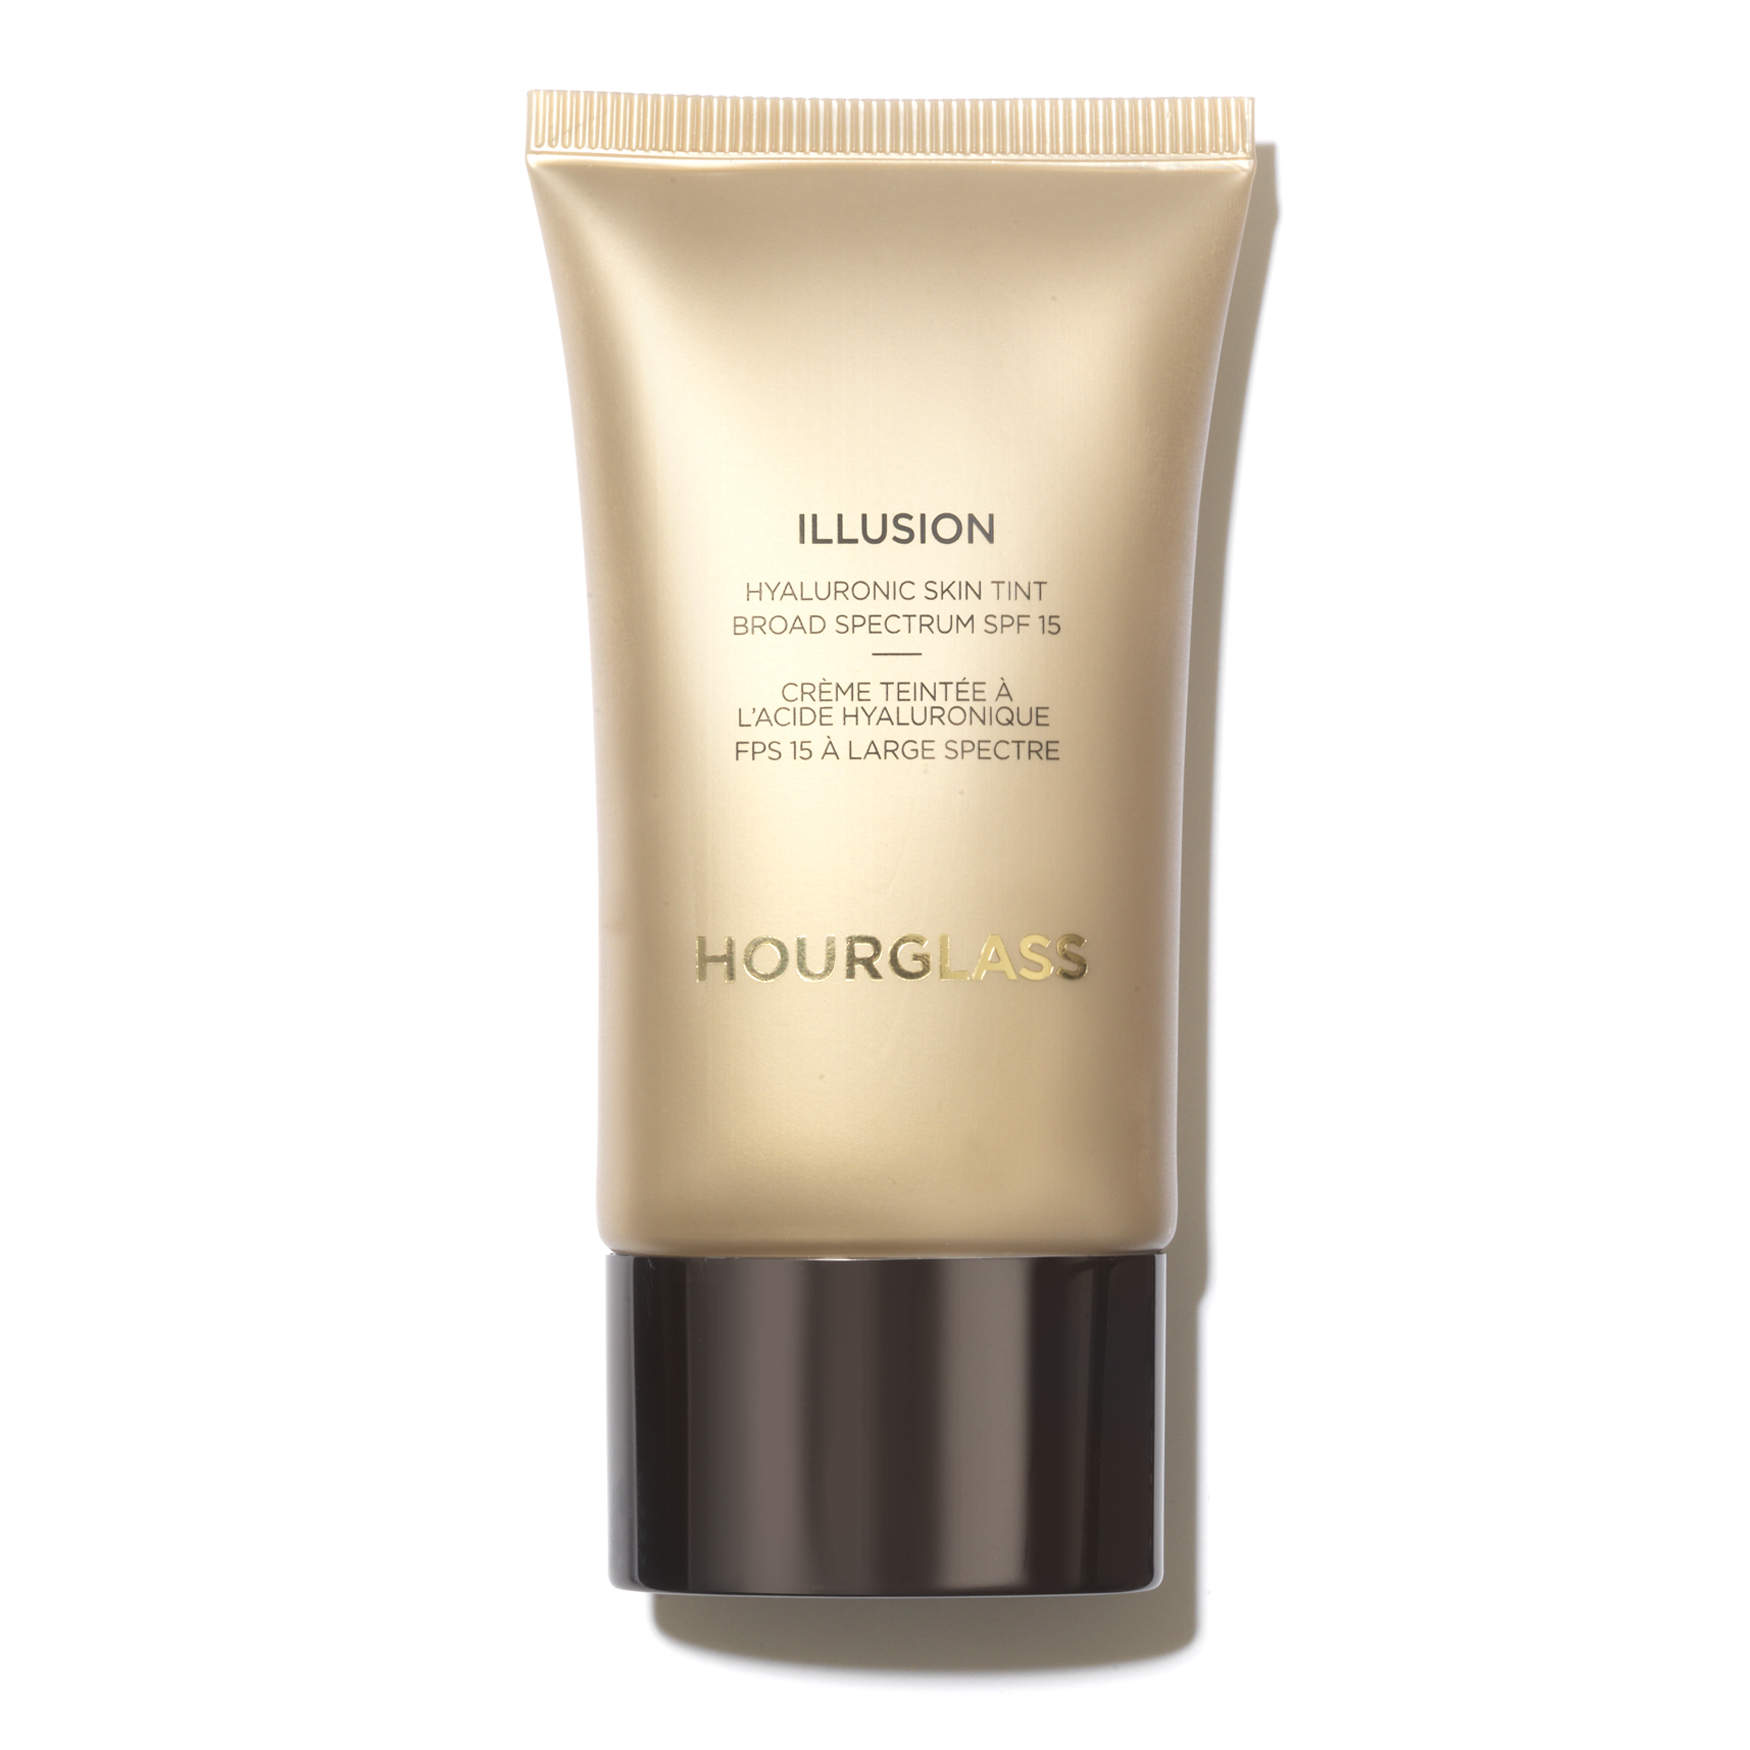 Hourglass Illusion Hyaluronic Skin Tint SPF15 | Space NK